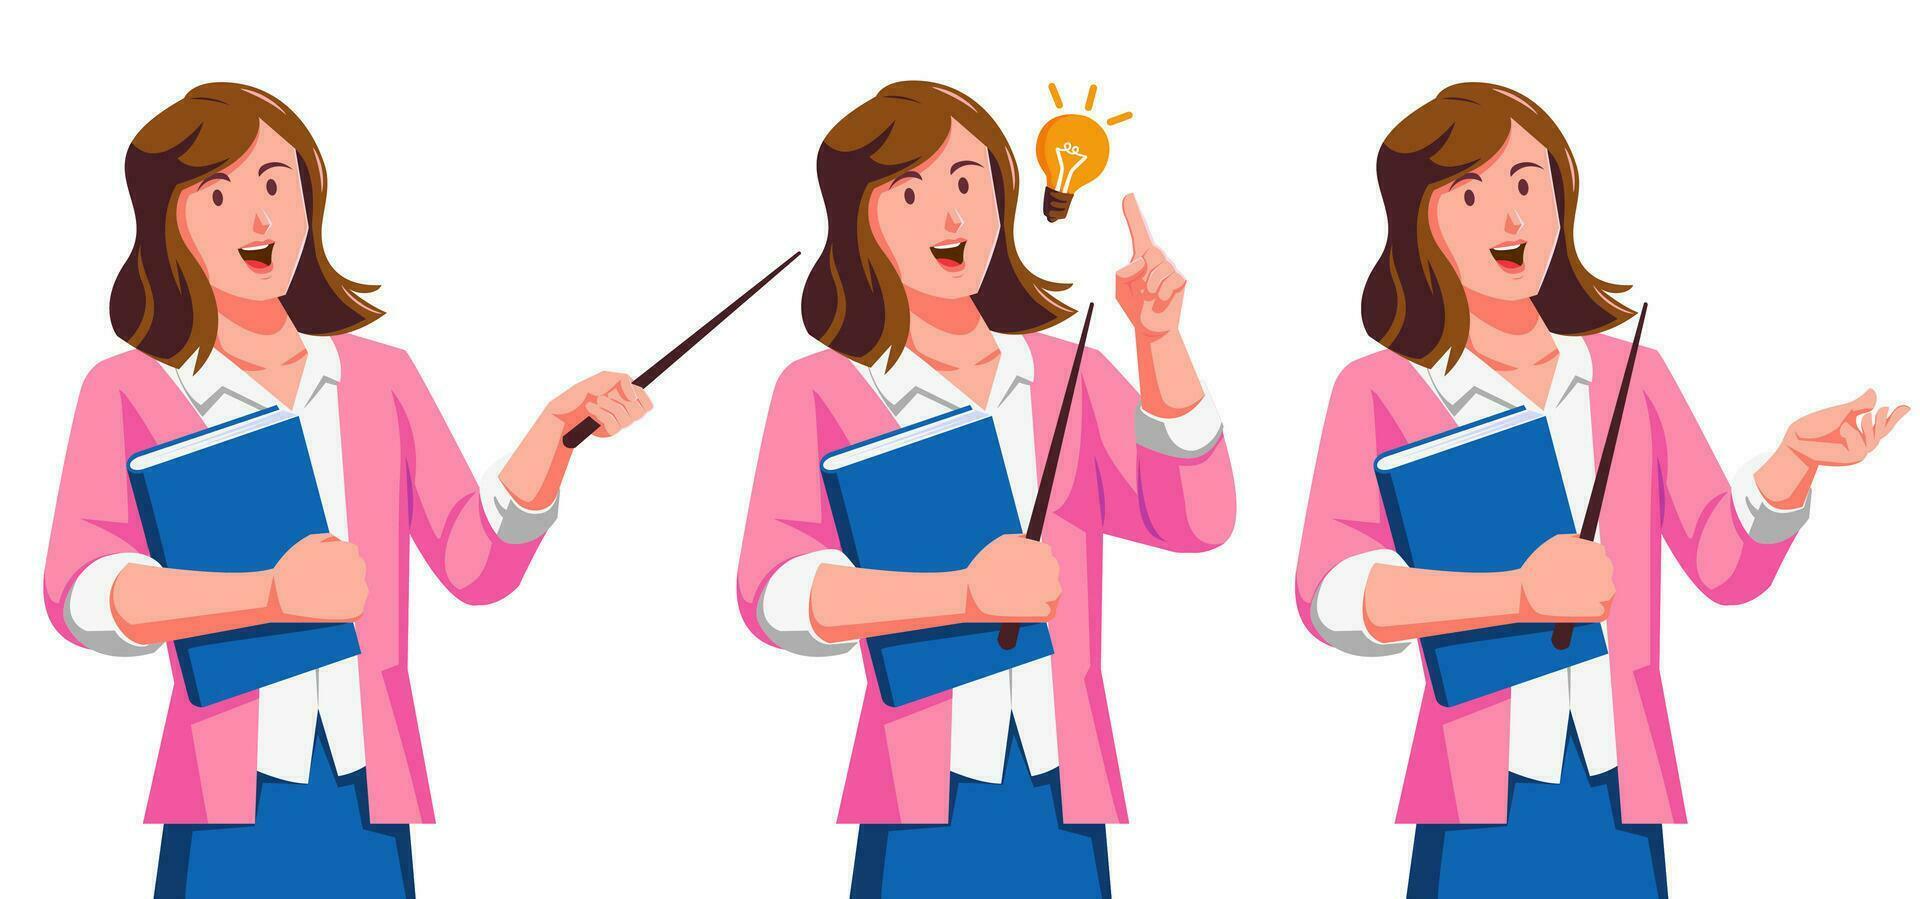 illustration of a female teacher carrying a book vector